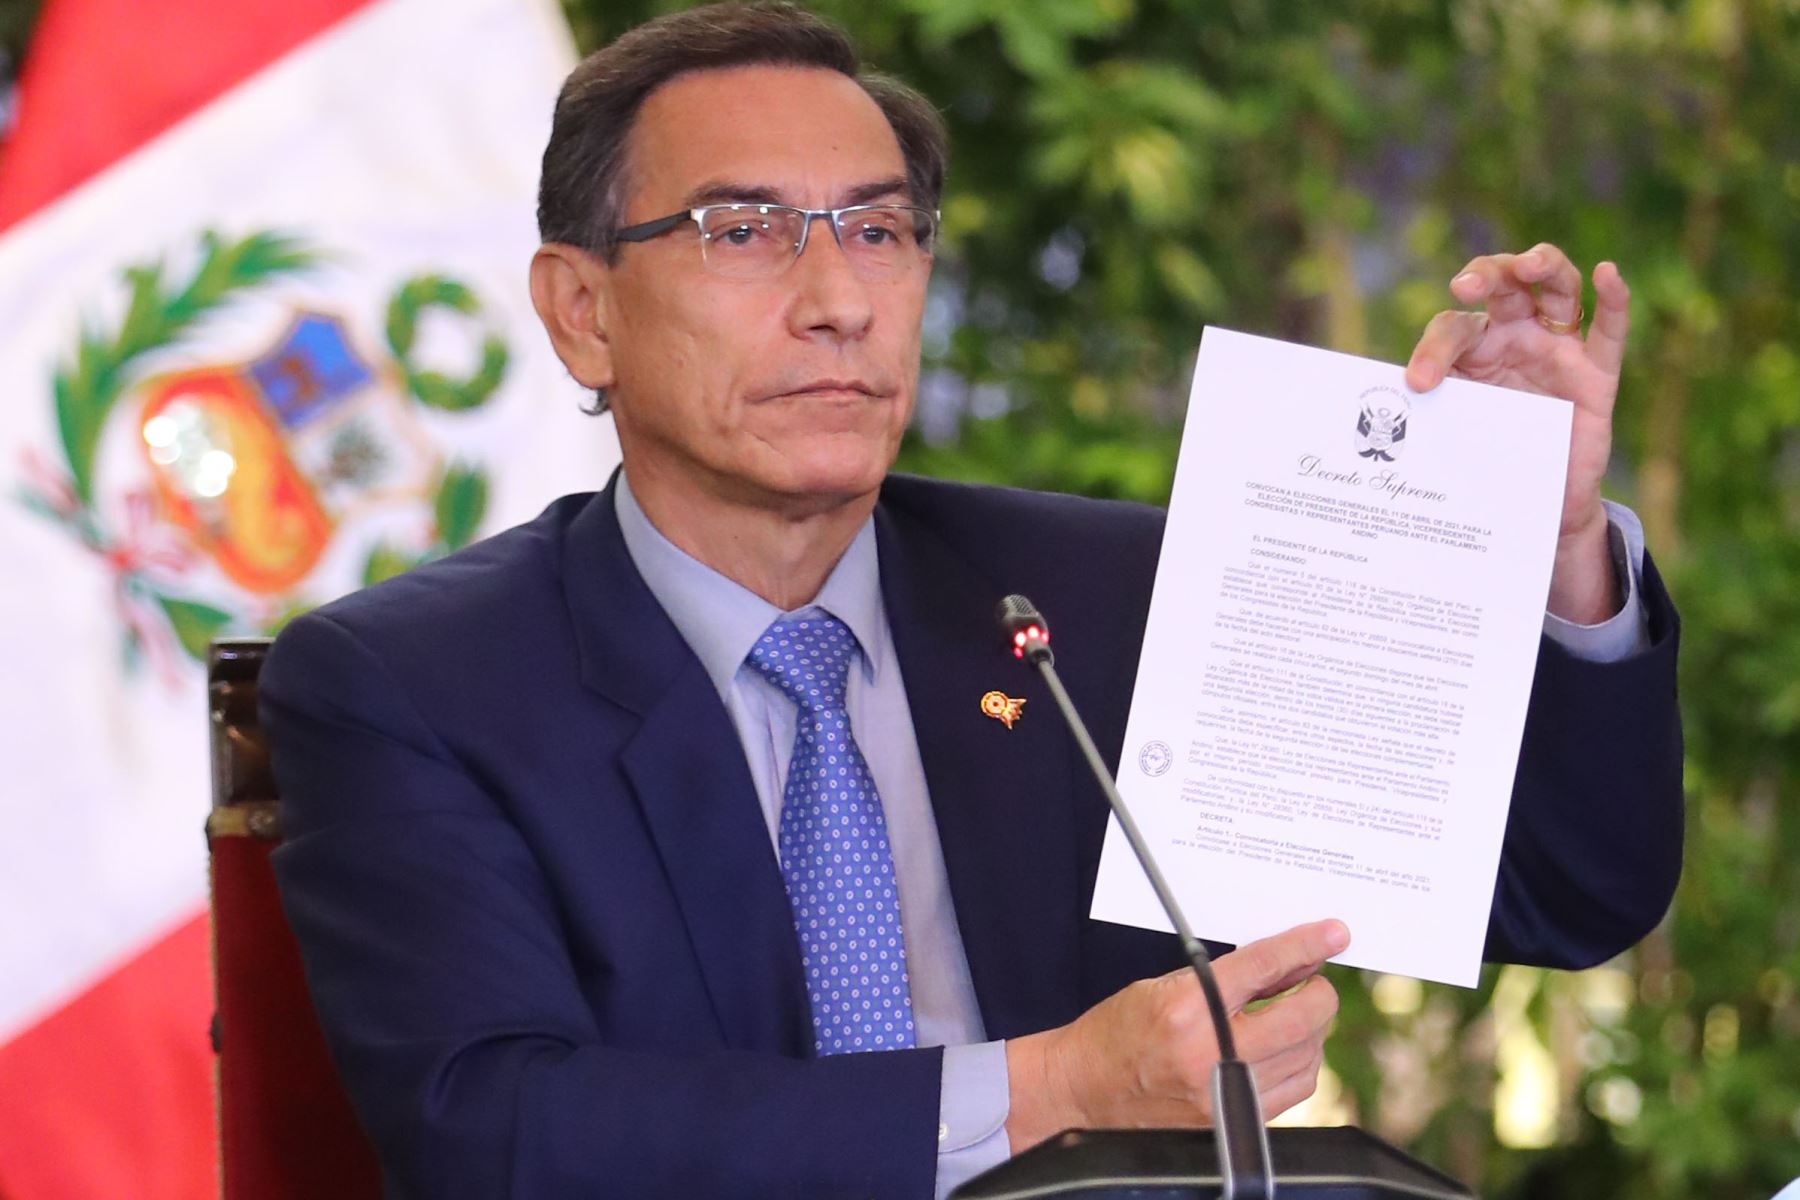 Peru's general elections will be held despite a second wave of COVID-19 infections, Peruvian President Francisco Sagasti said on Thursday, January 21st.